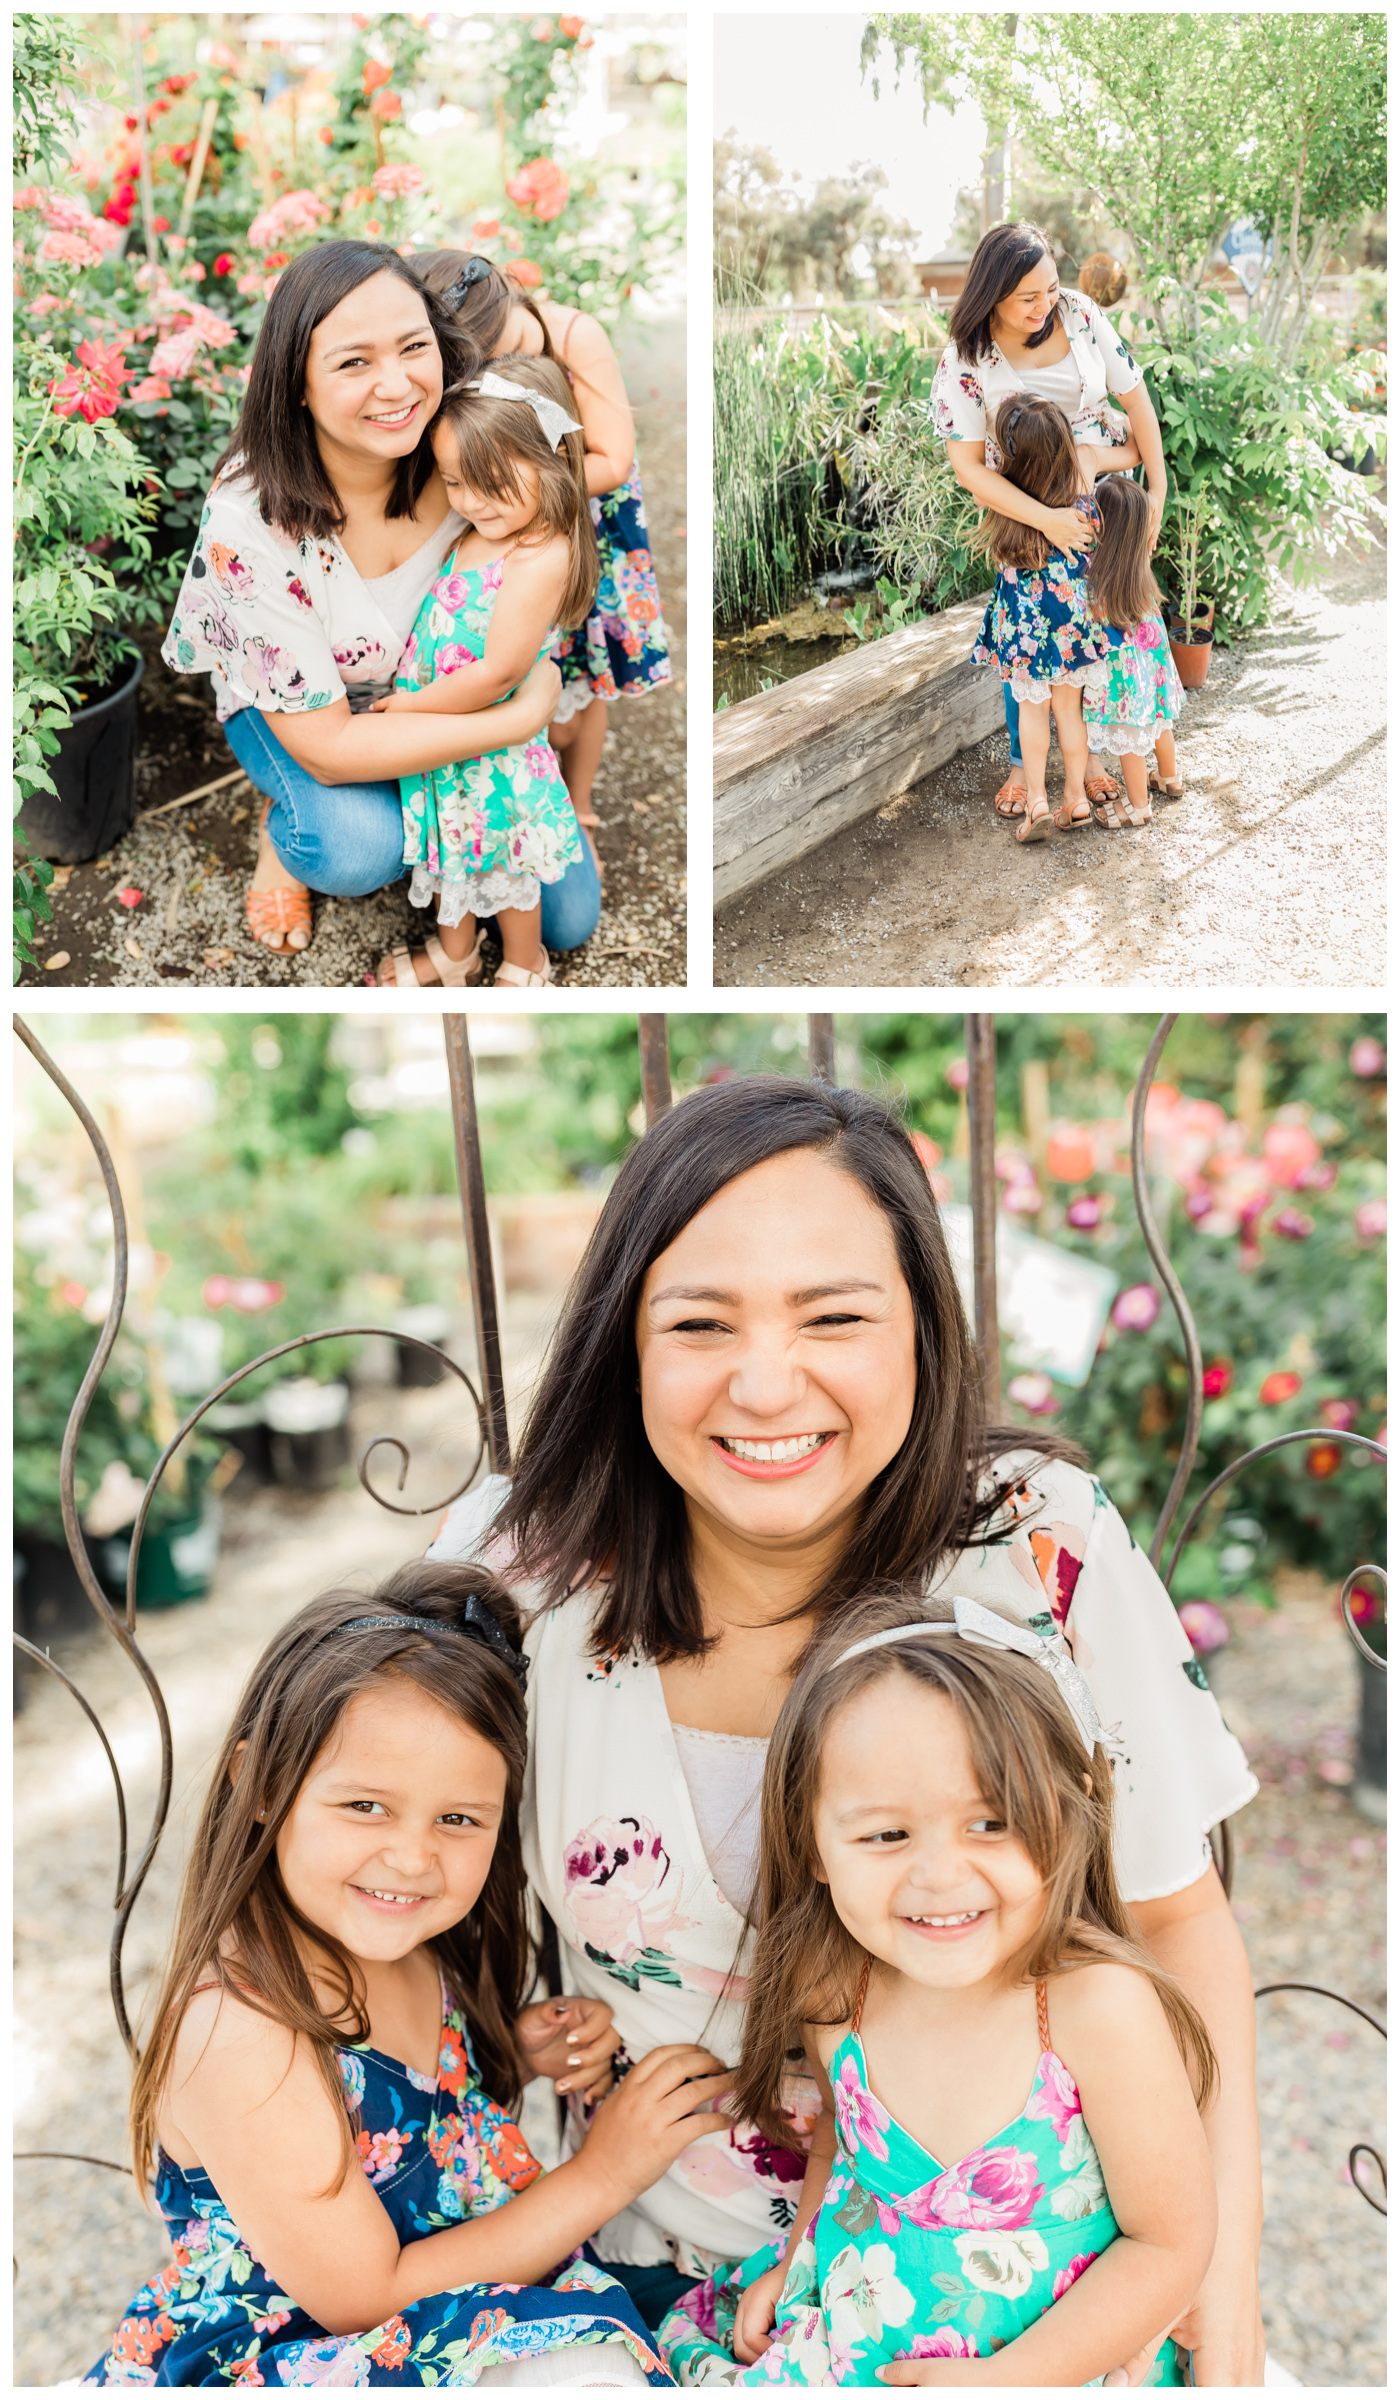 Collage of images of mother with two little girls